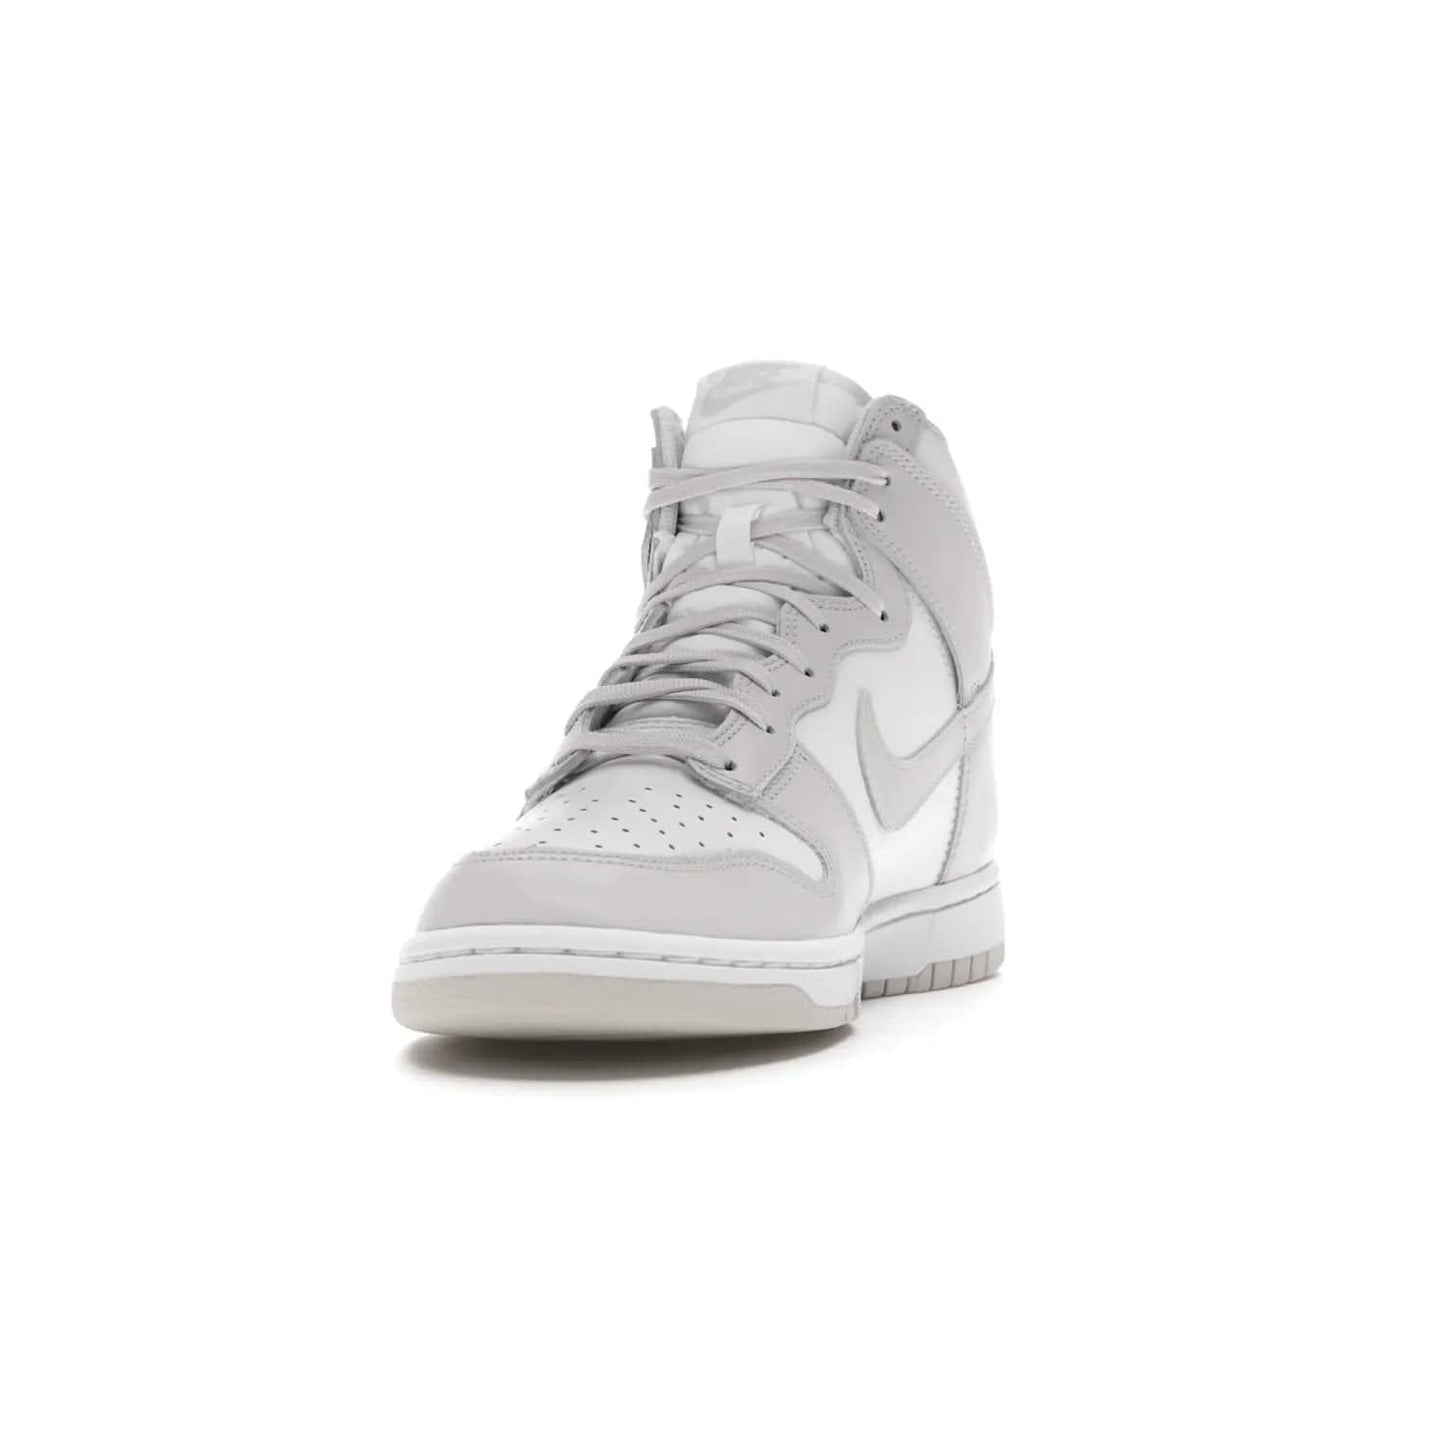 Nike Dunk High Retro White Vast Grey (2021) - Image 12 - Only at www.BallersClubKickz.com - Nike Dunk High Retro White Vast Grey 2021: classic '80s basketball sneaker with a crisp white base, grey overlays, midsole tooling and outsole. Dropped Feb. 2021.